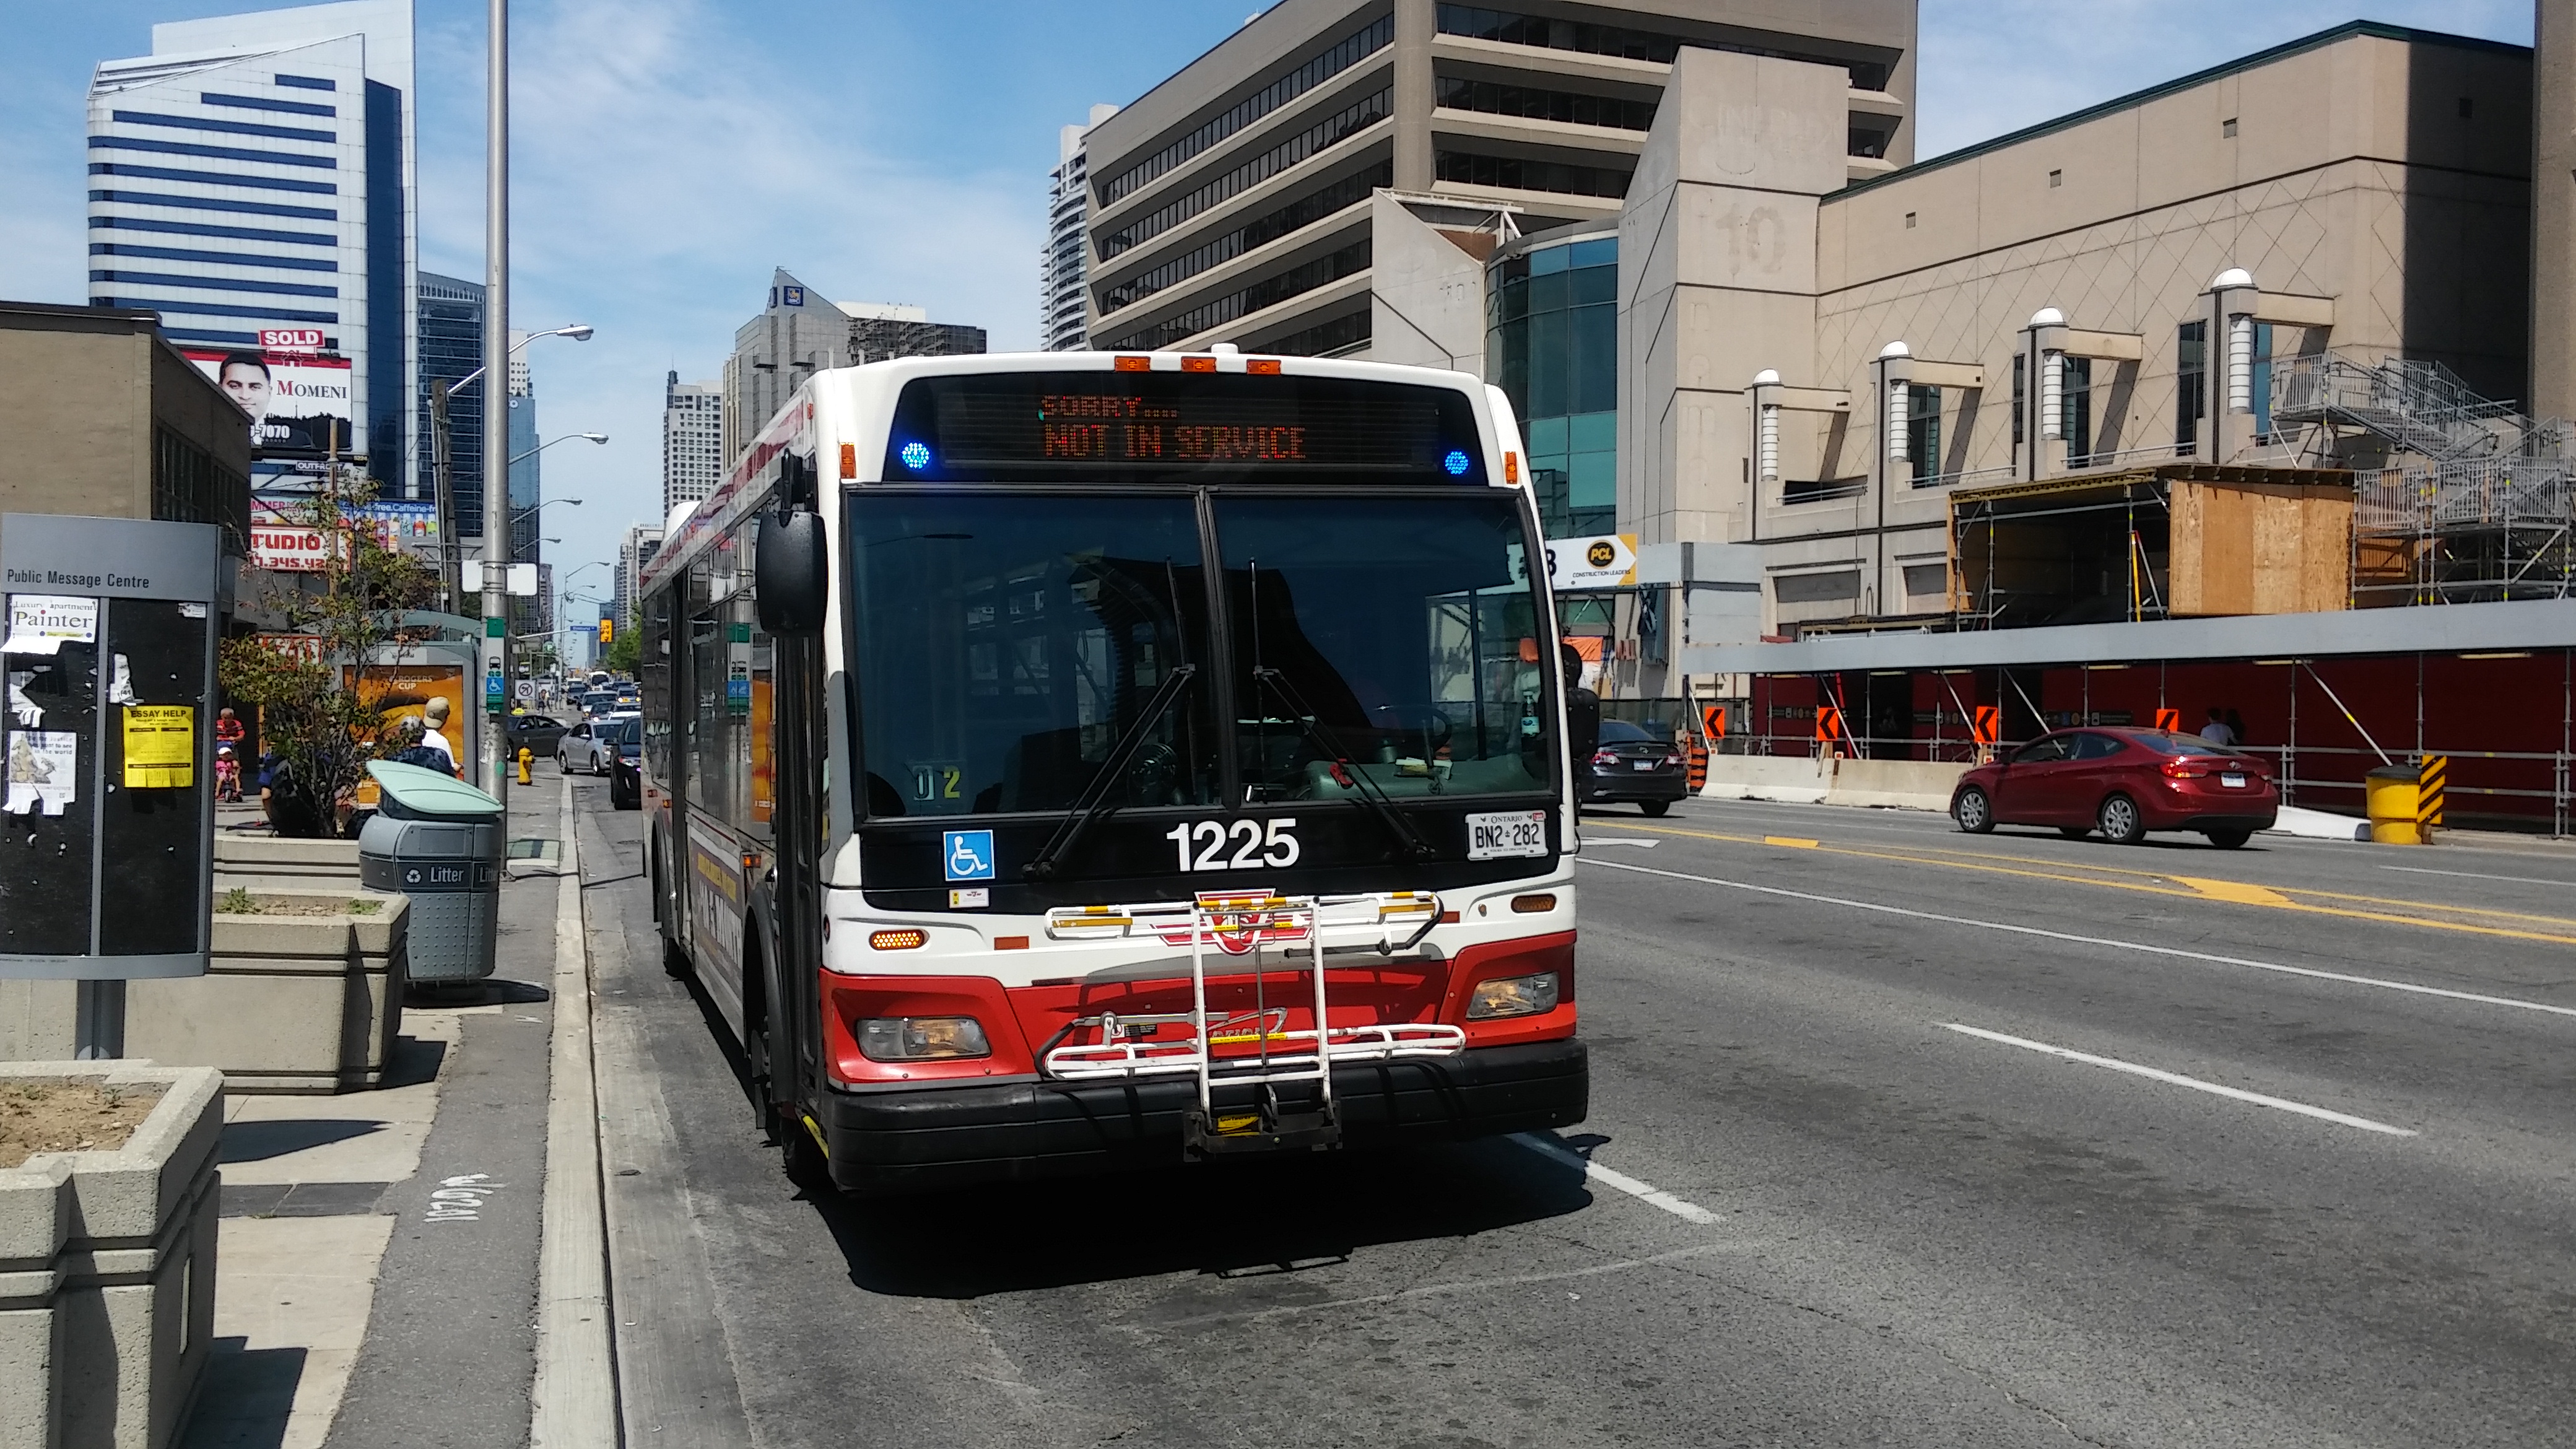 here is a photo of one of the buses that passed us by that read Out Of Service.

this is ridiculous when more than 20 customers were waiting for the bus to go Southbound on Yonge Street earlier this a